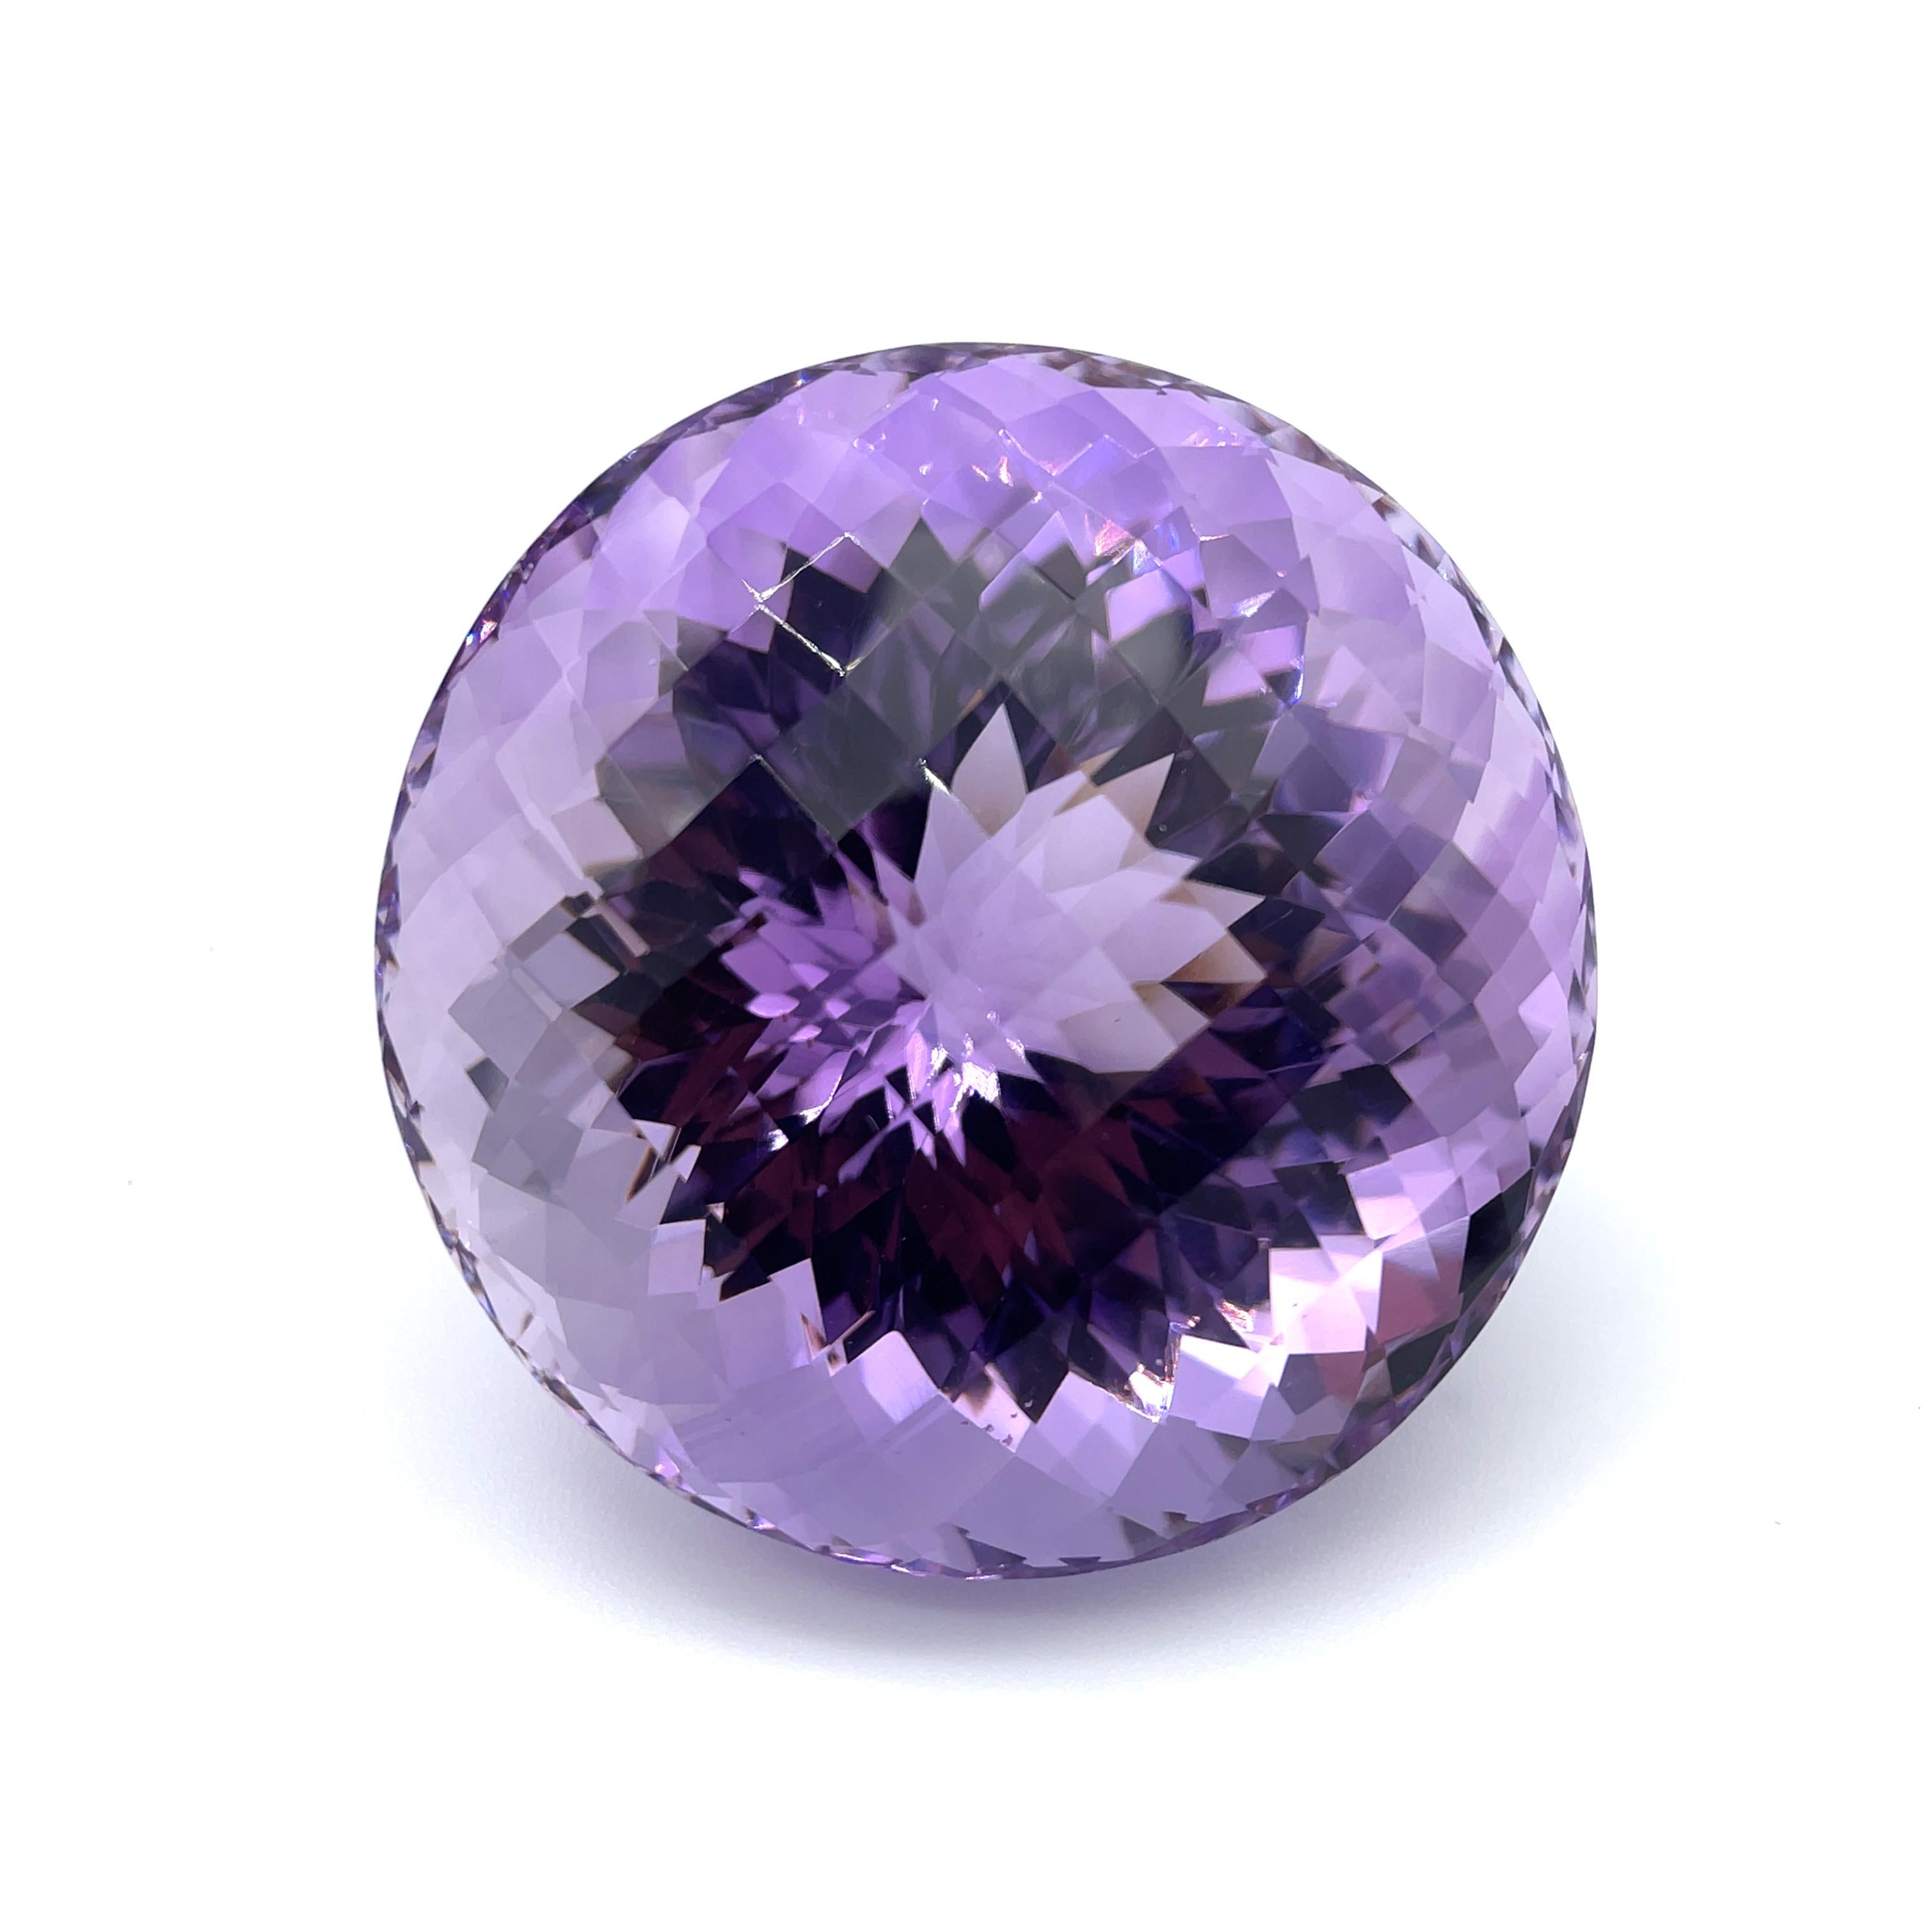 651 Carat Round Faceted Checkerboard Amethyst Collector Gemstone  For Sale 1